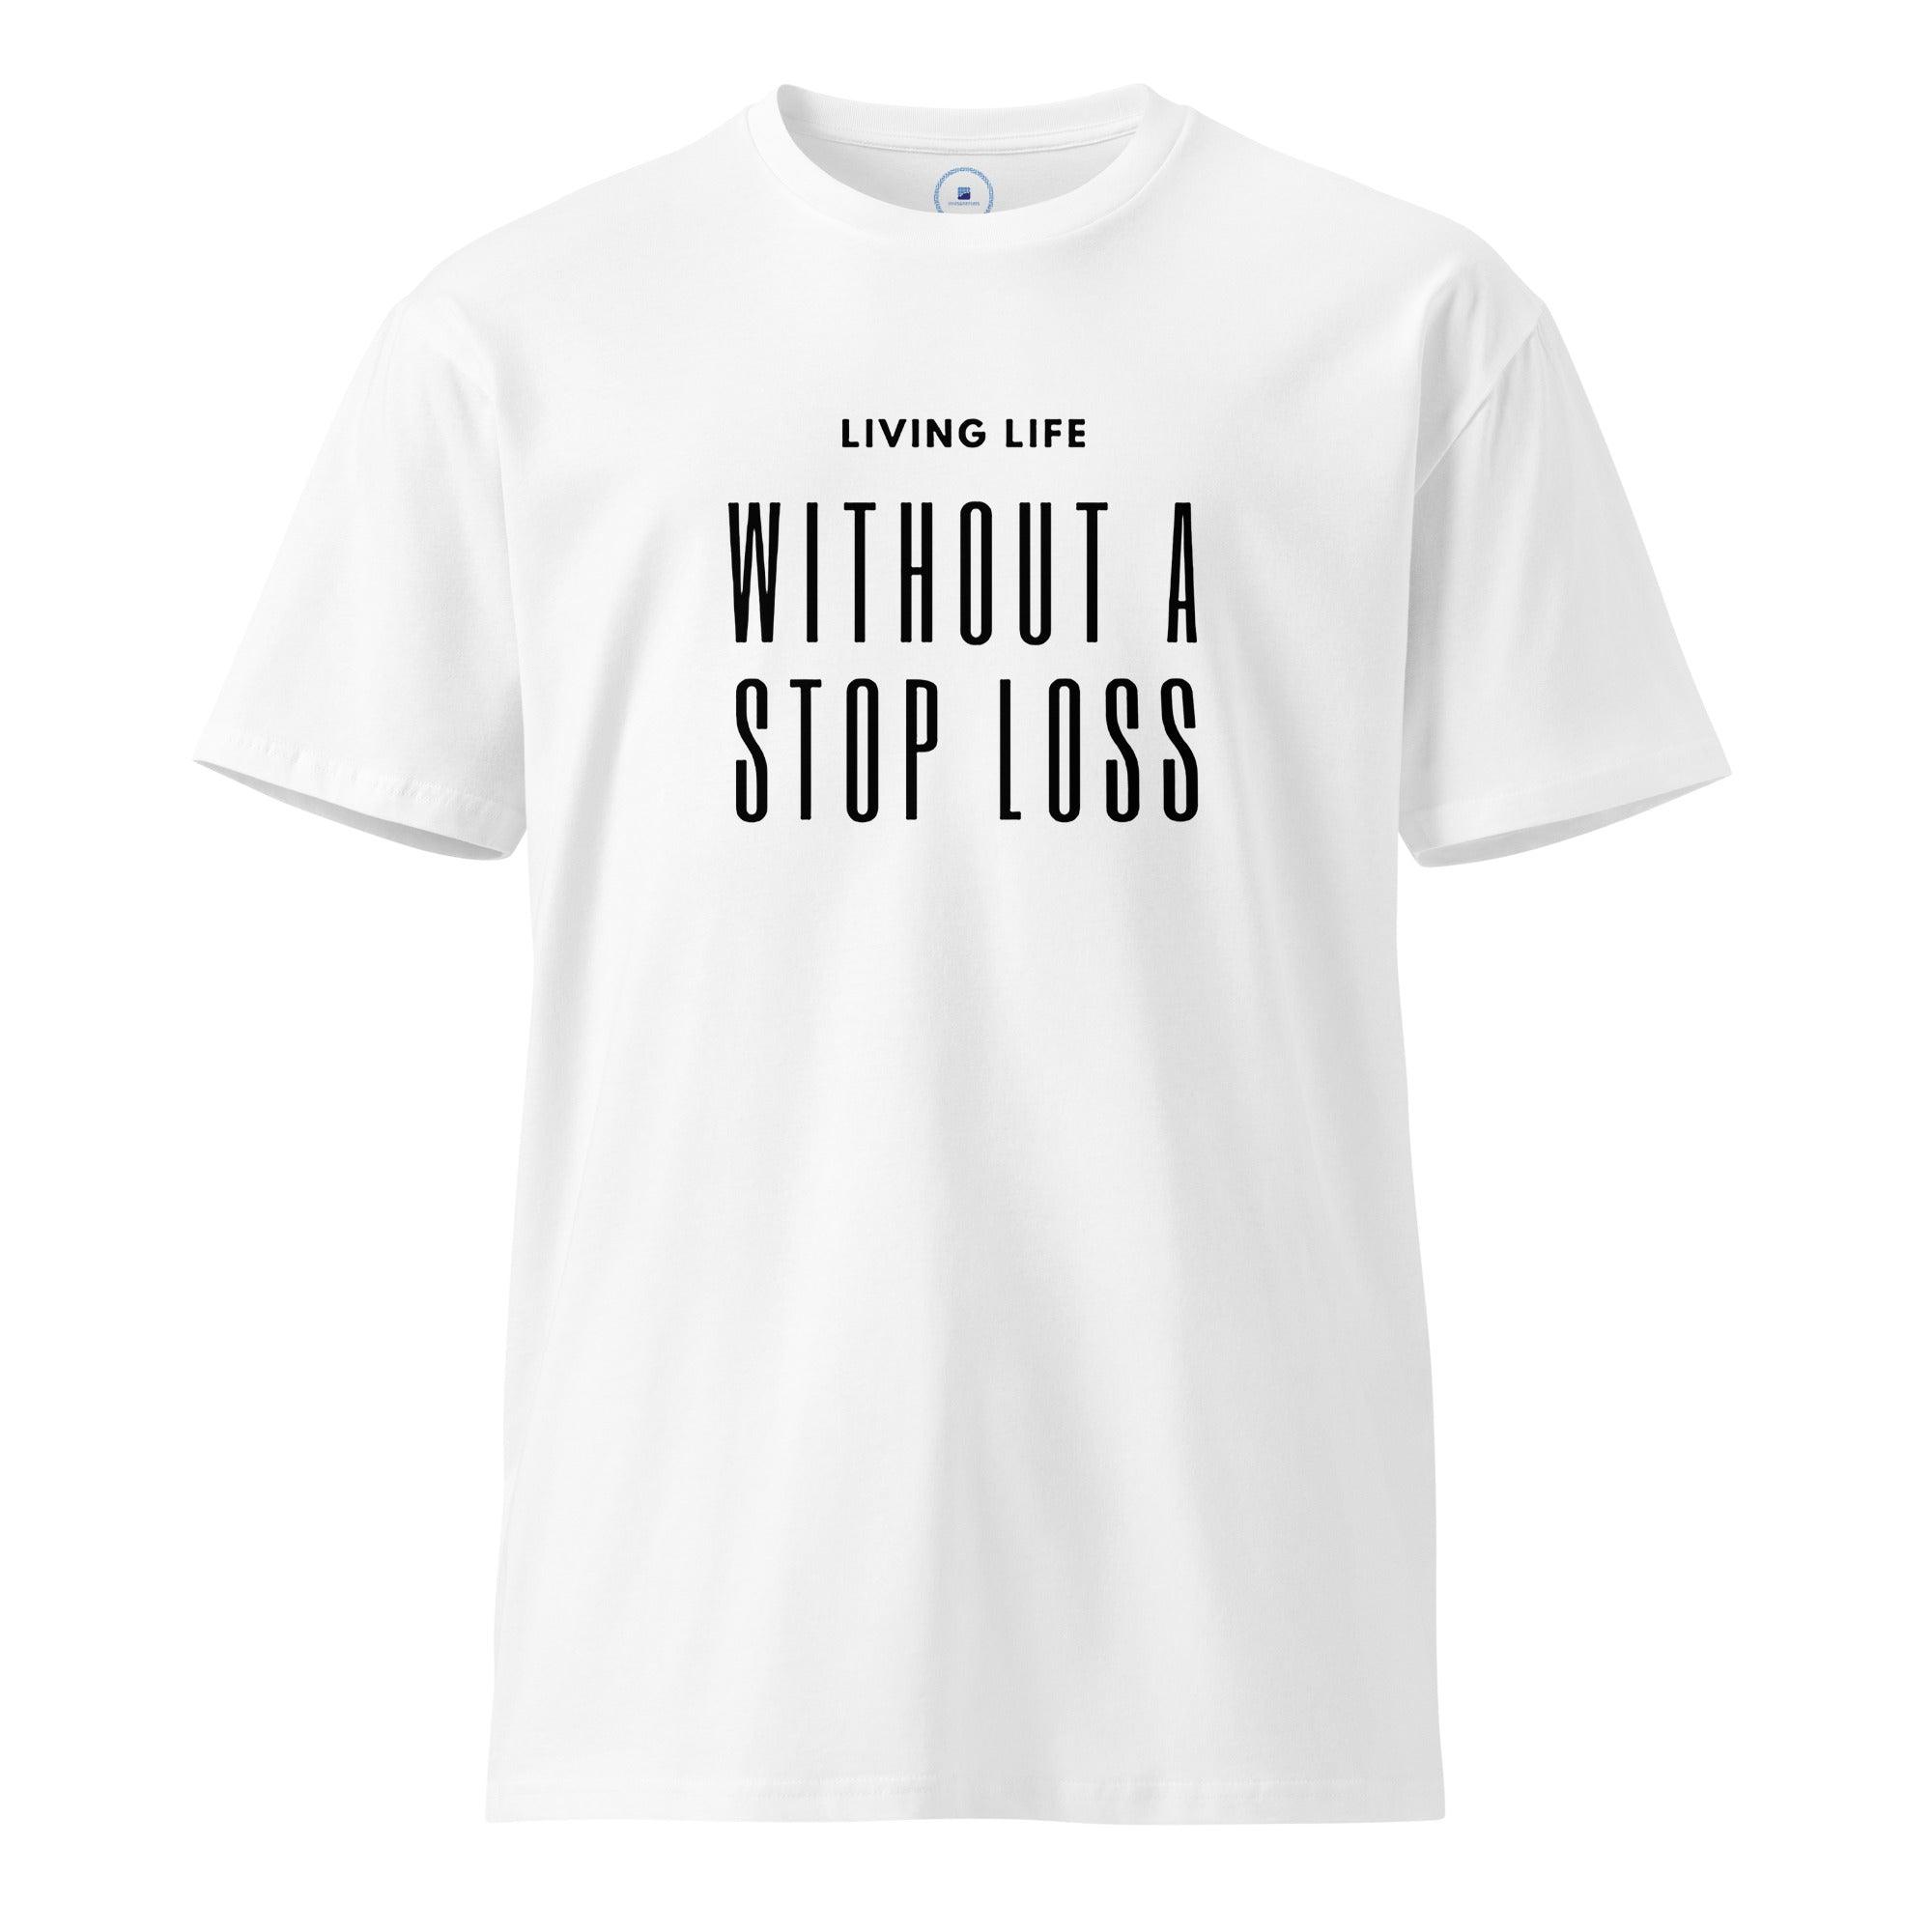 Life Without Stoploss T-Shirt - InvestmenTees